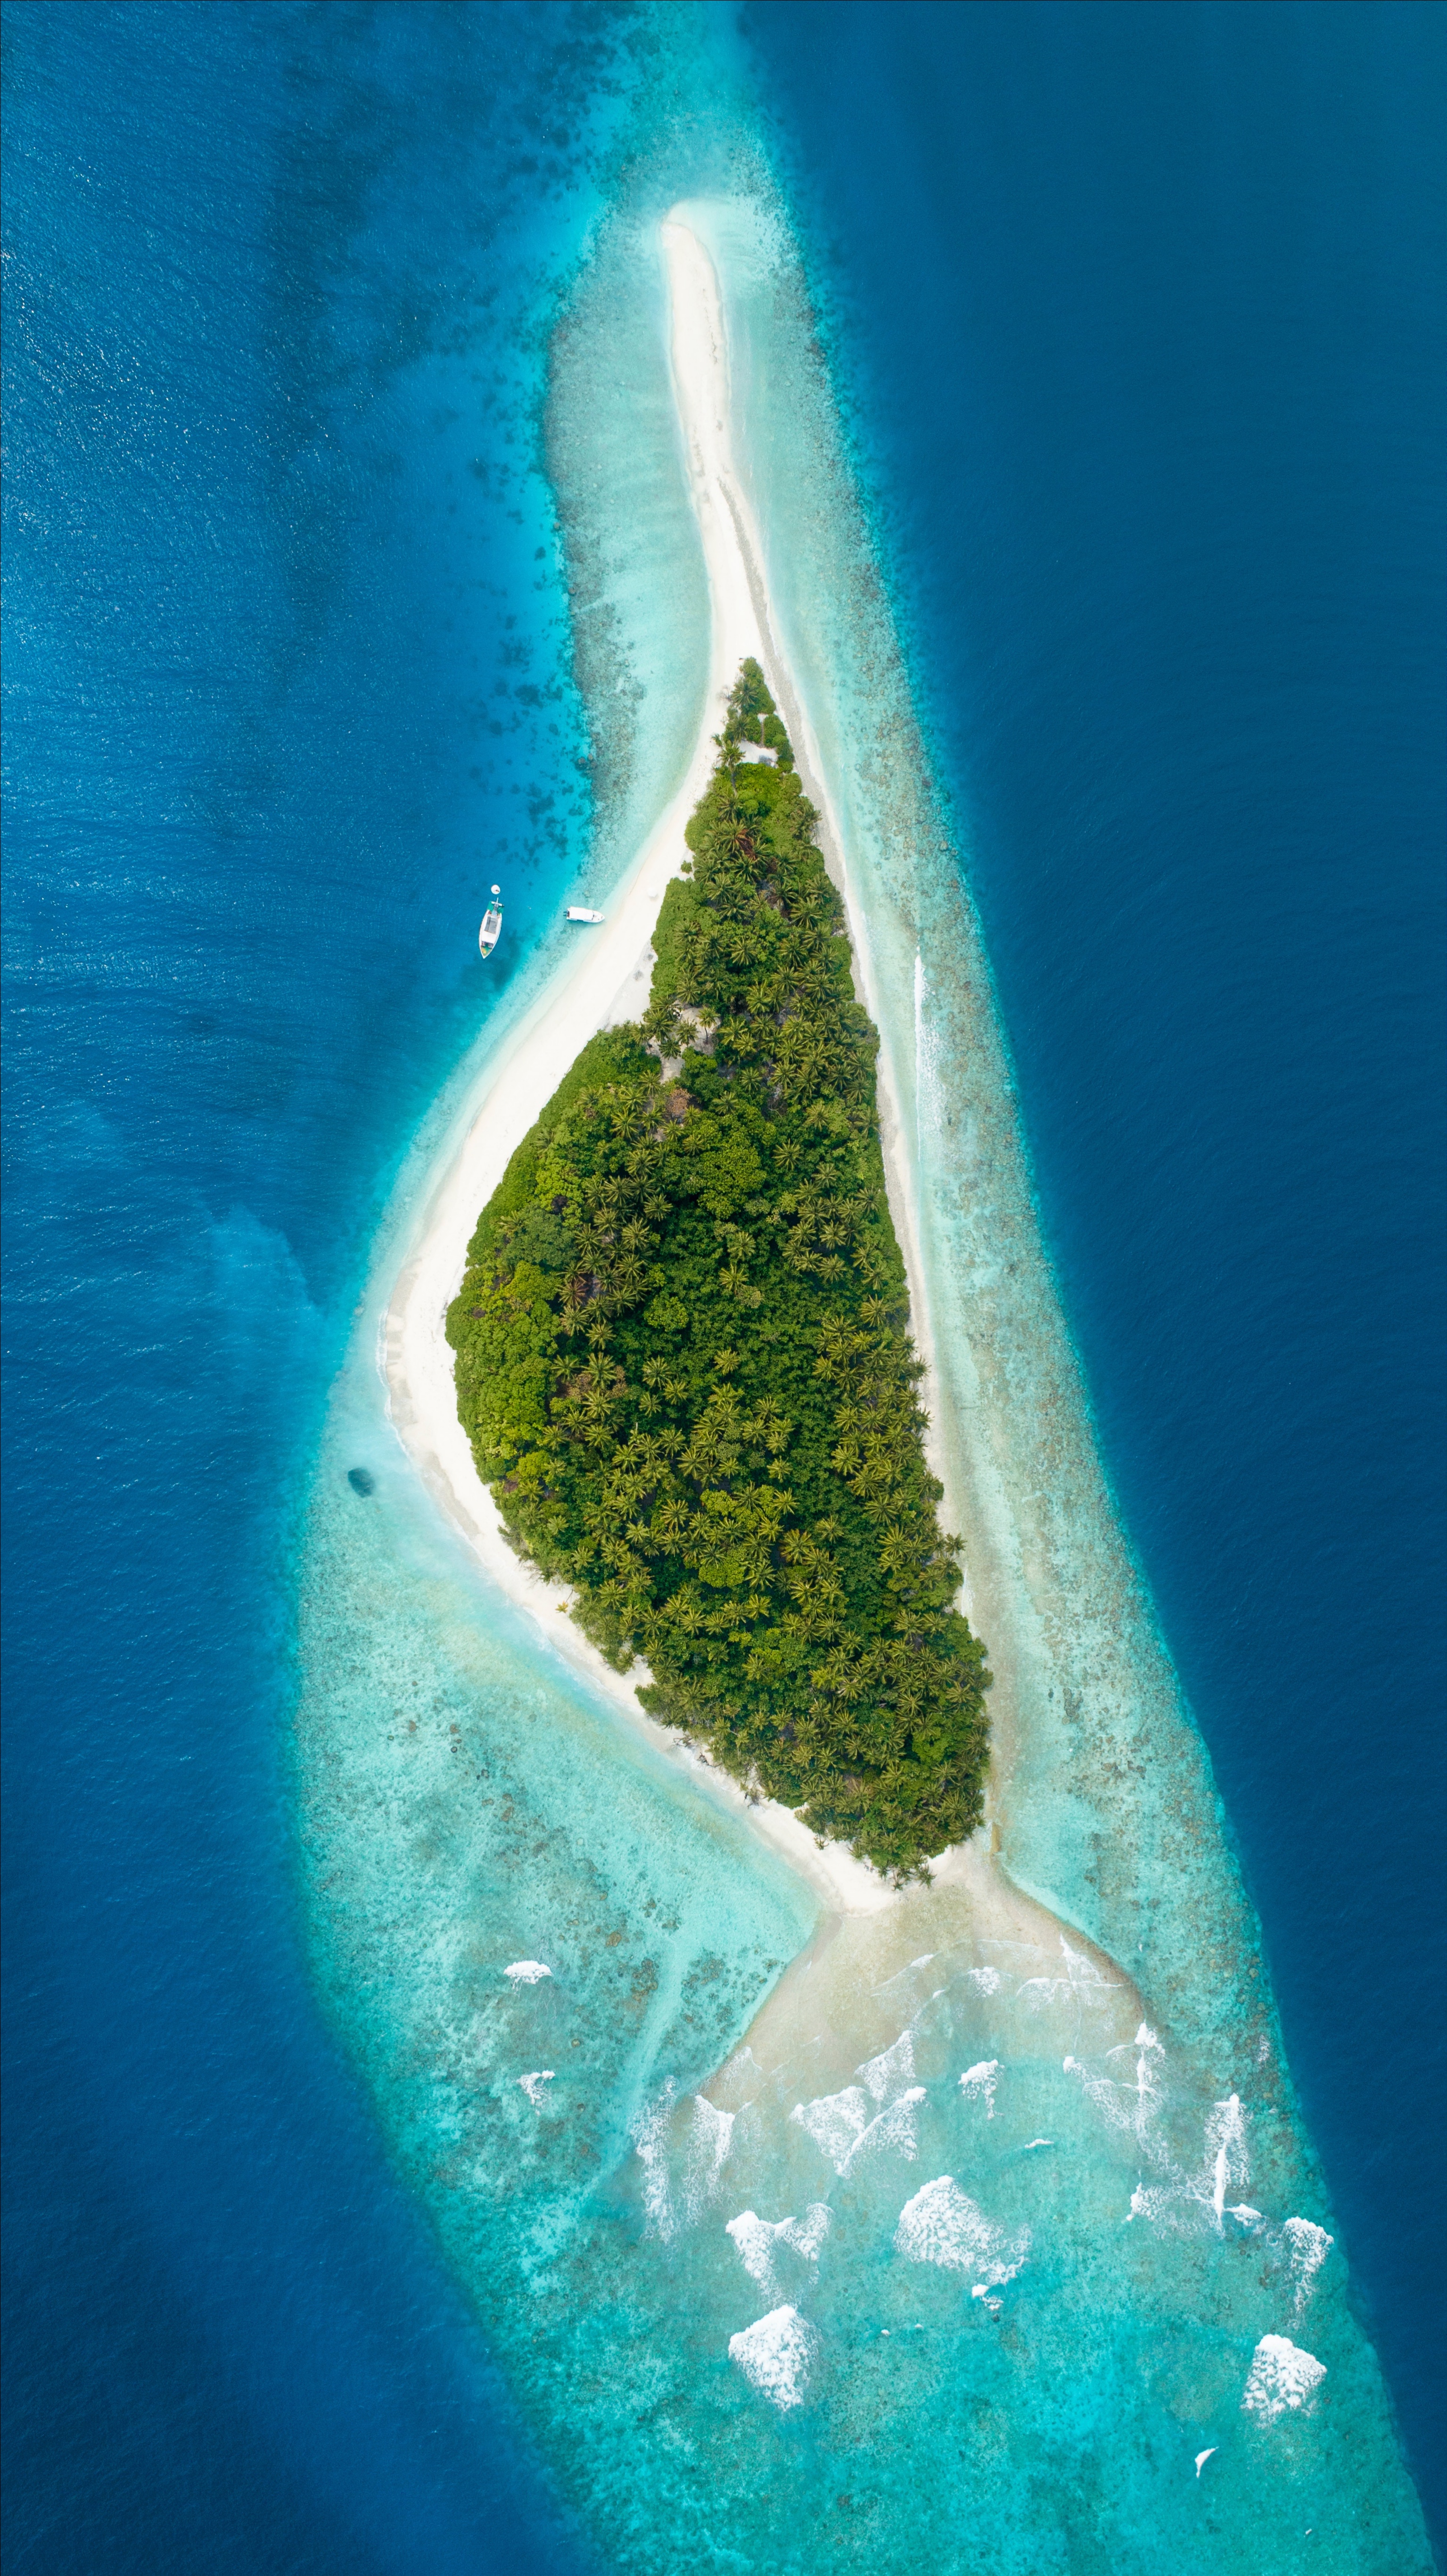 tropics, nature, view from above, ocean, island, maldives lock screen backgrounds